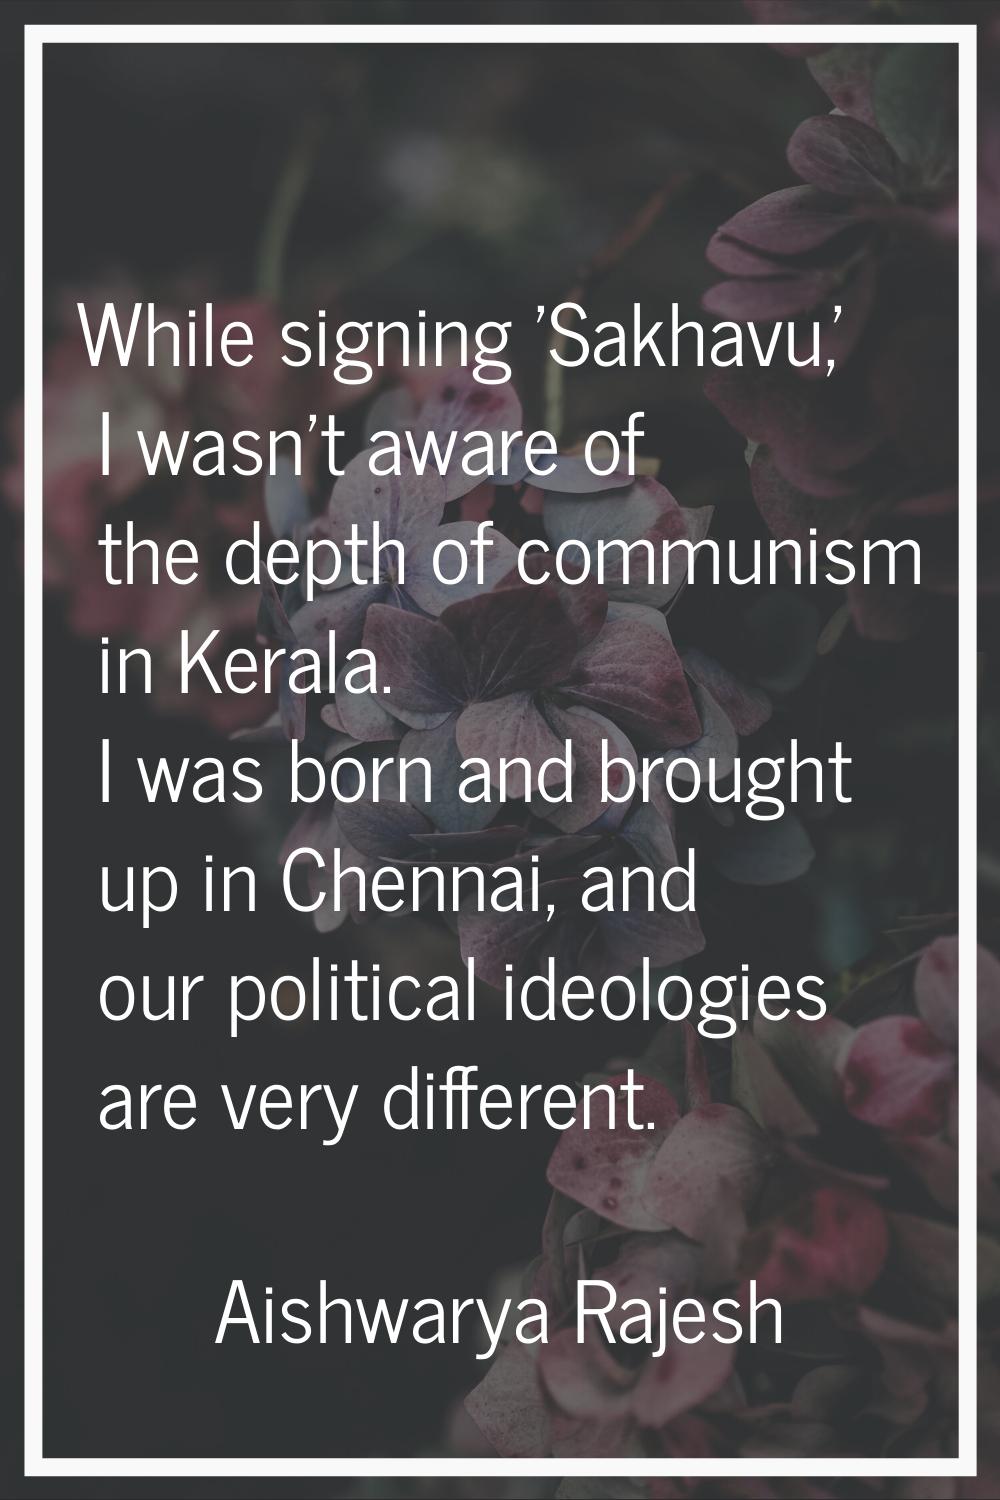 While signing 'Sakhavu,' I wasn't aware of the depth of communism in Kerala. I was born and brought